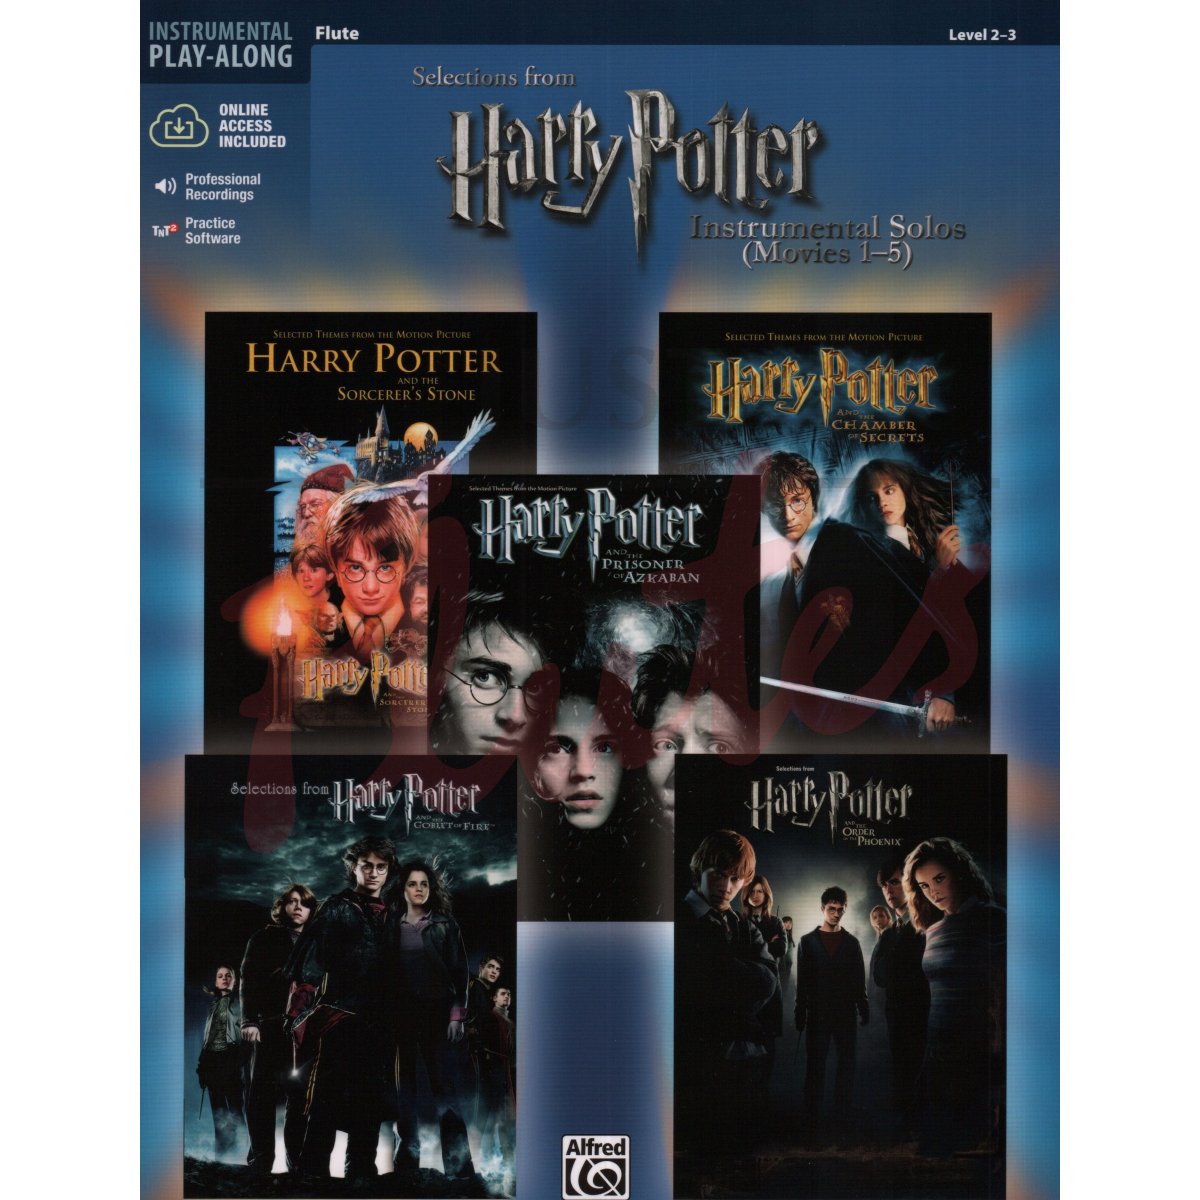 Selections from Harry Potter Movies 1-5 for Flute